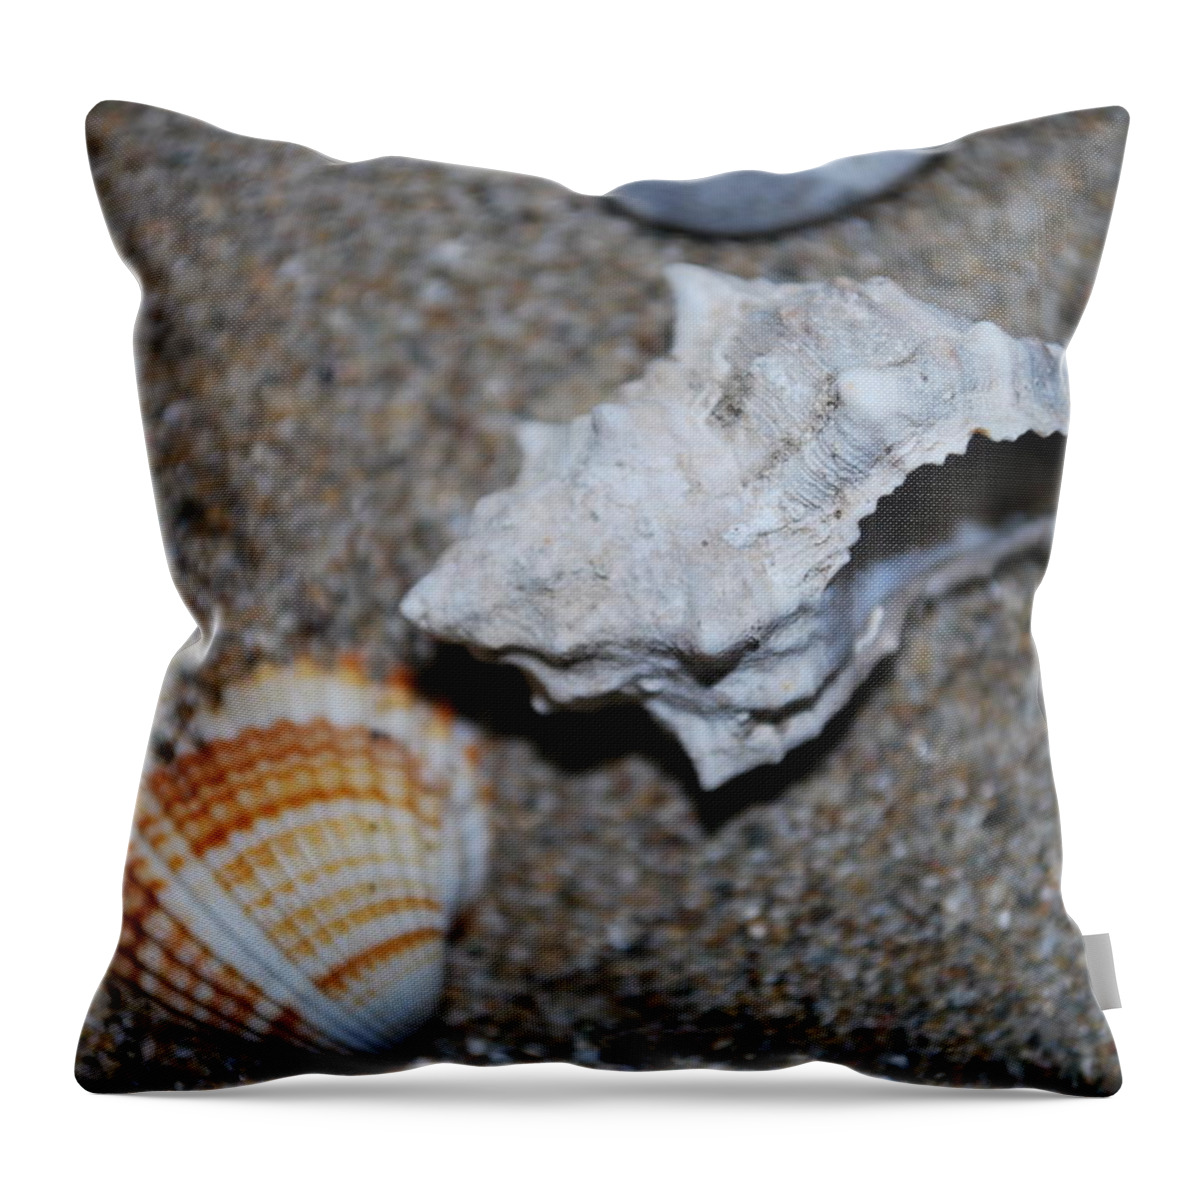 Conch Throw Pillow featuring the photograph Conch 2 by George Katechis